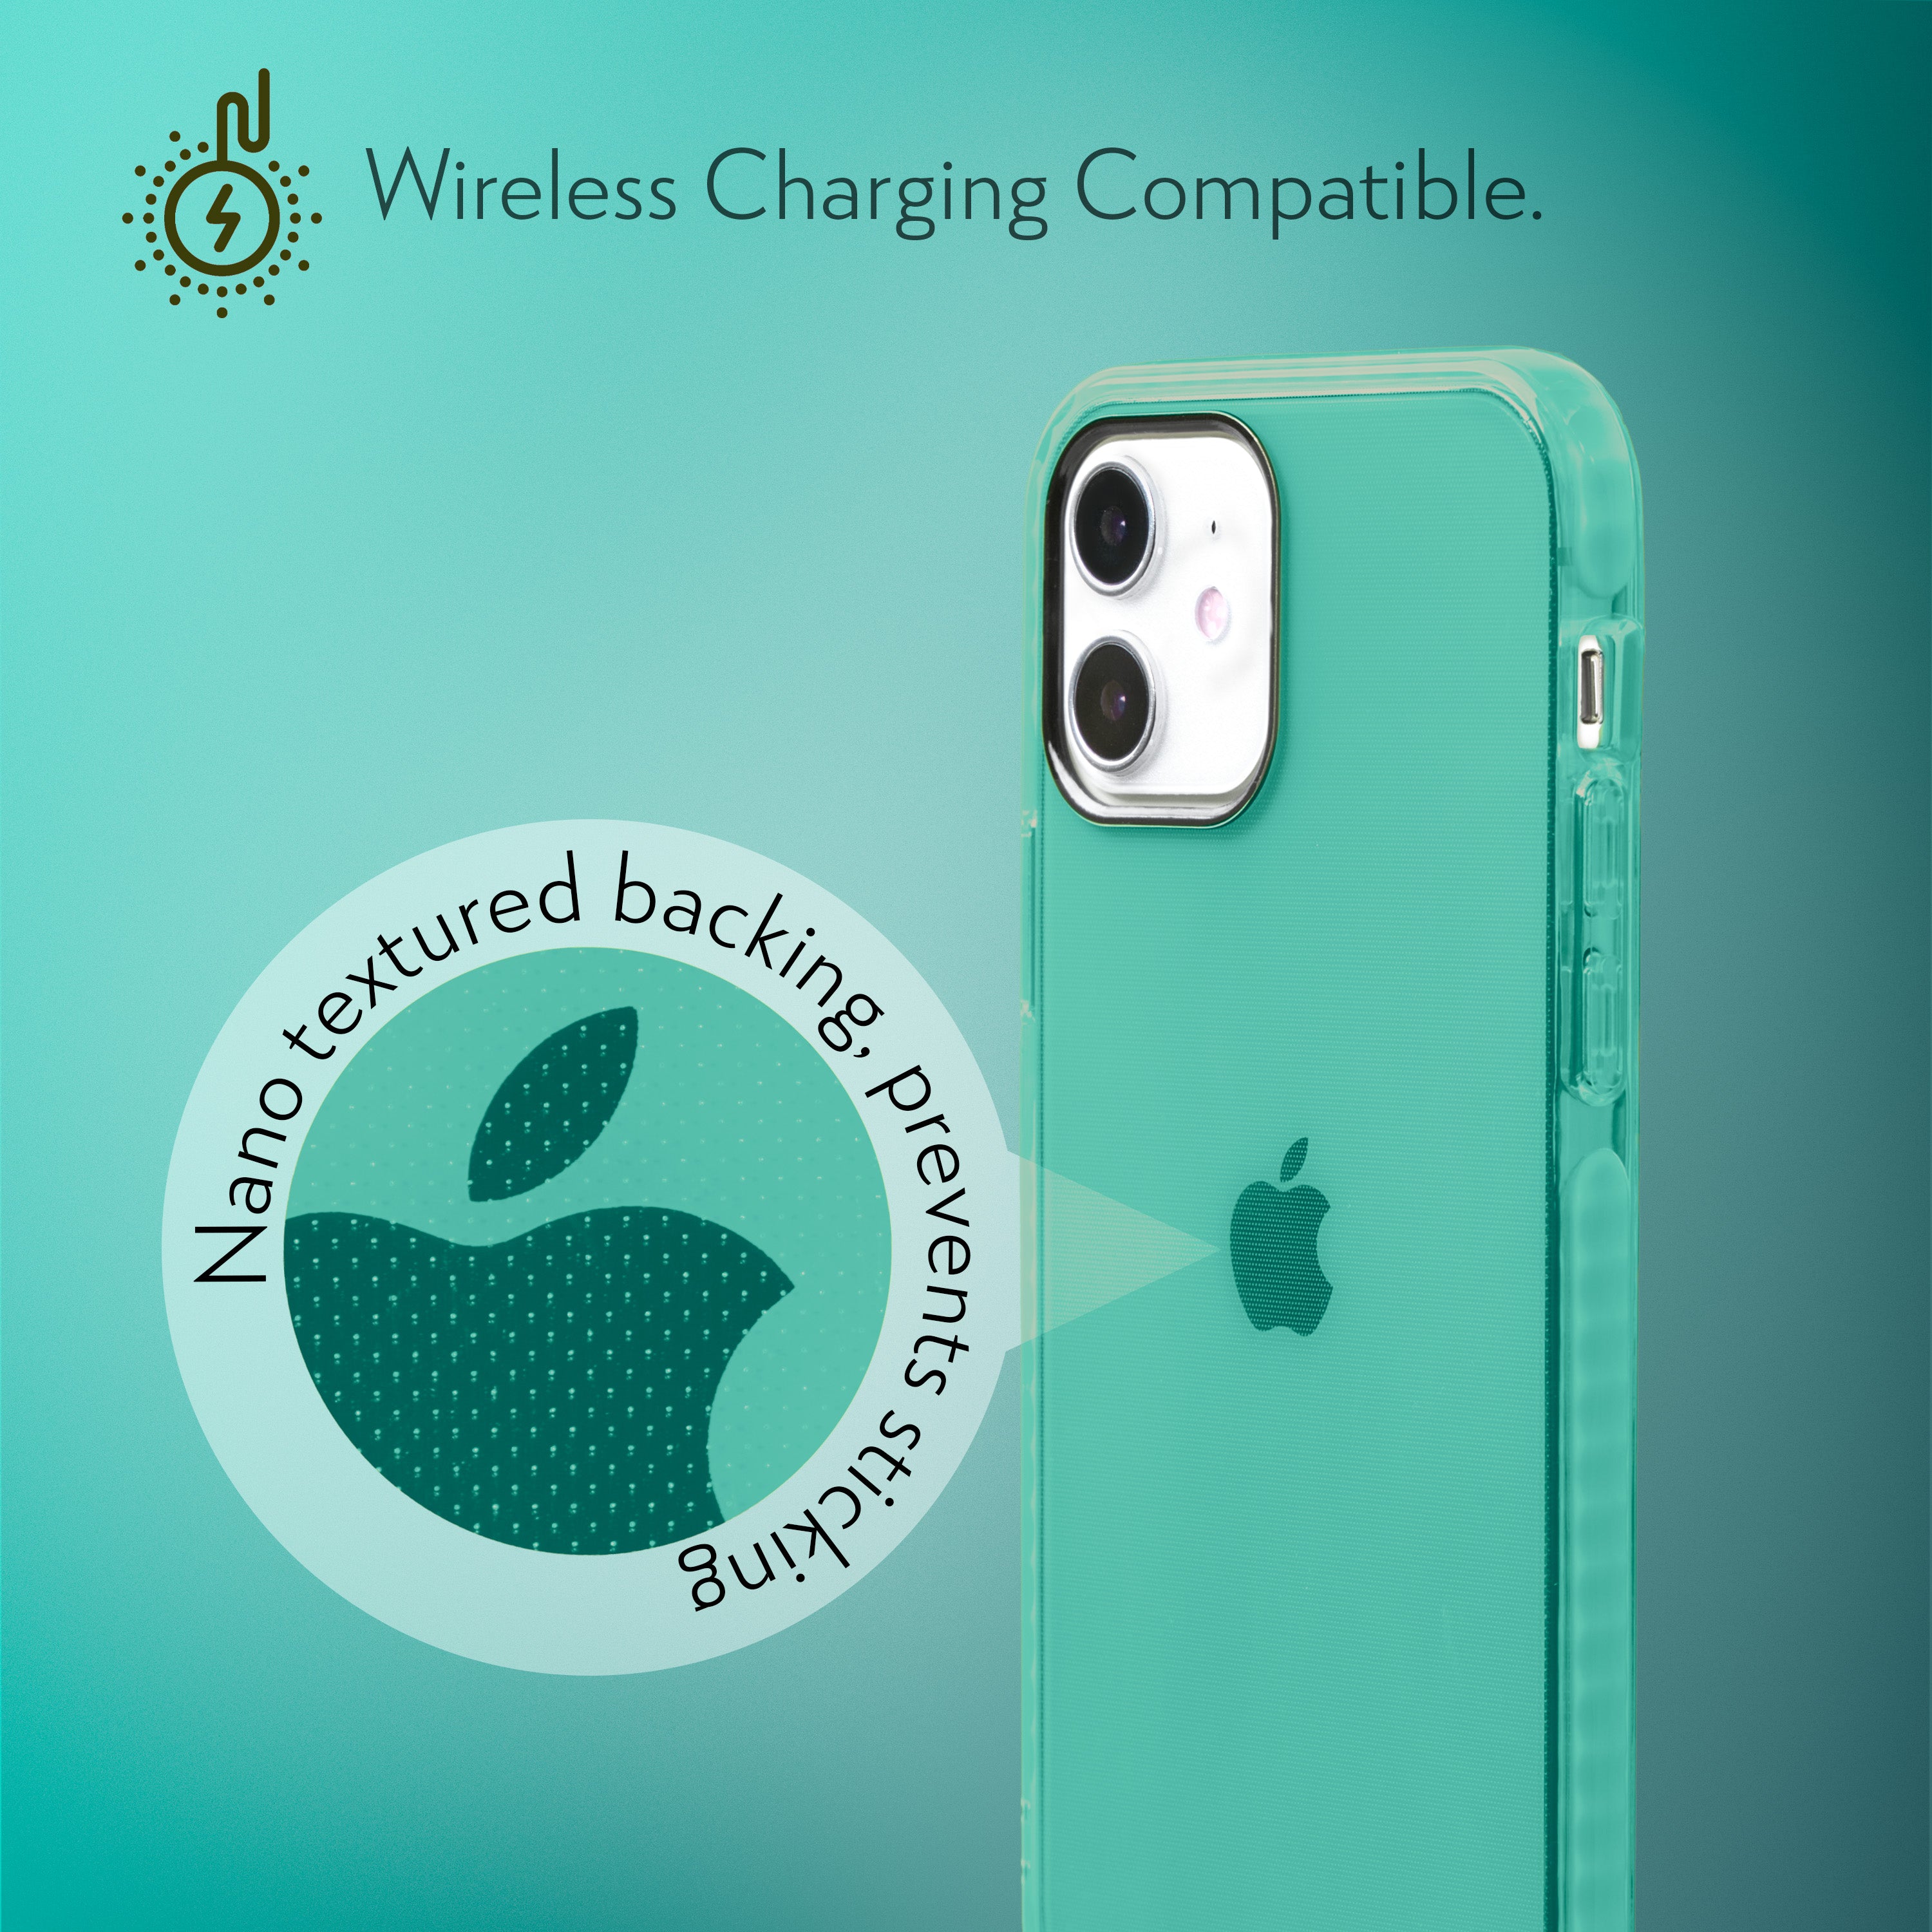 Barrier Case for iPhone 12 Mini - Polished Turquoise Blue